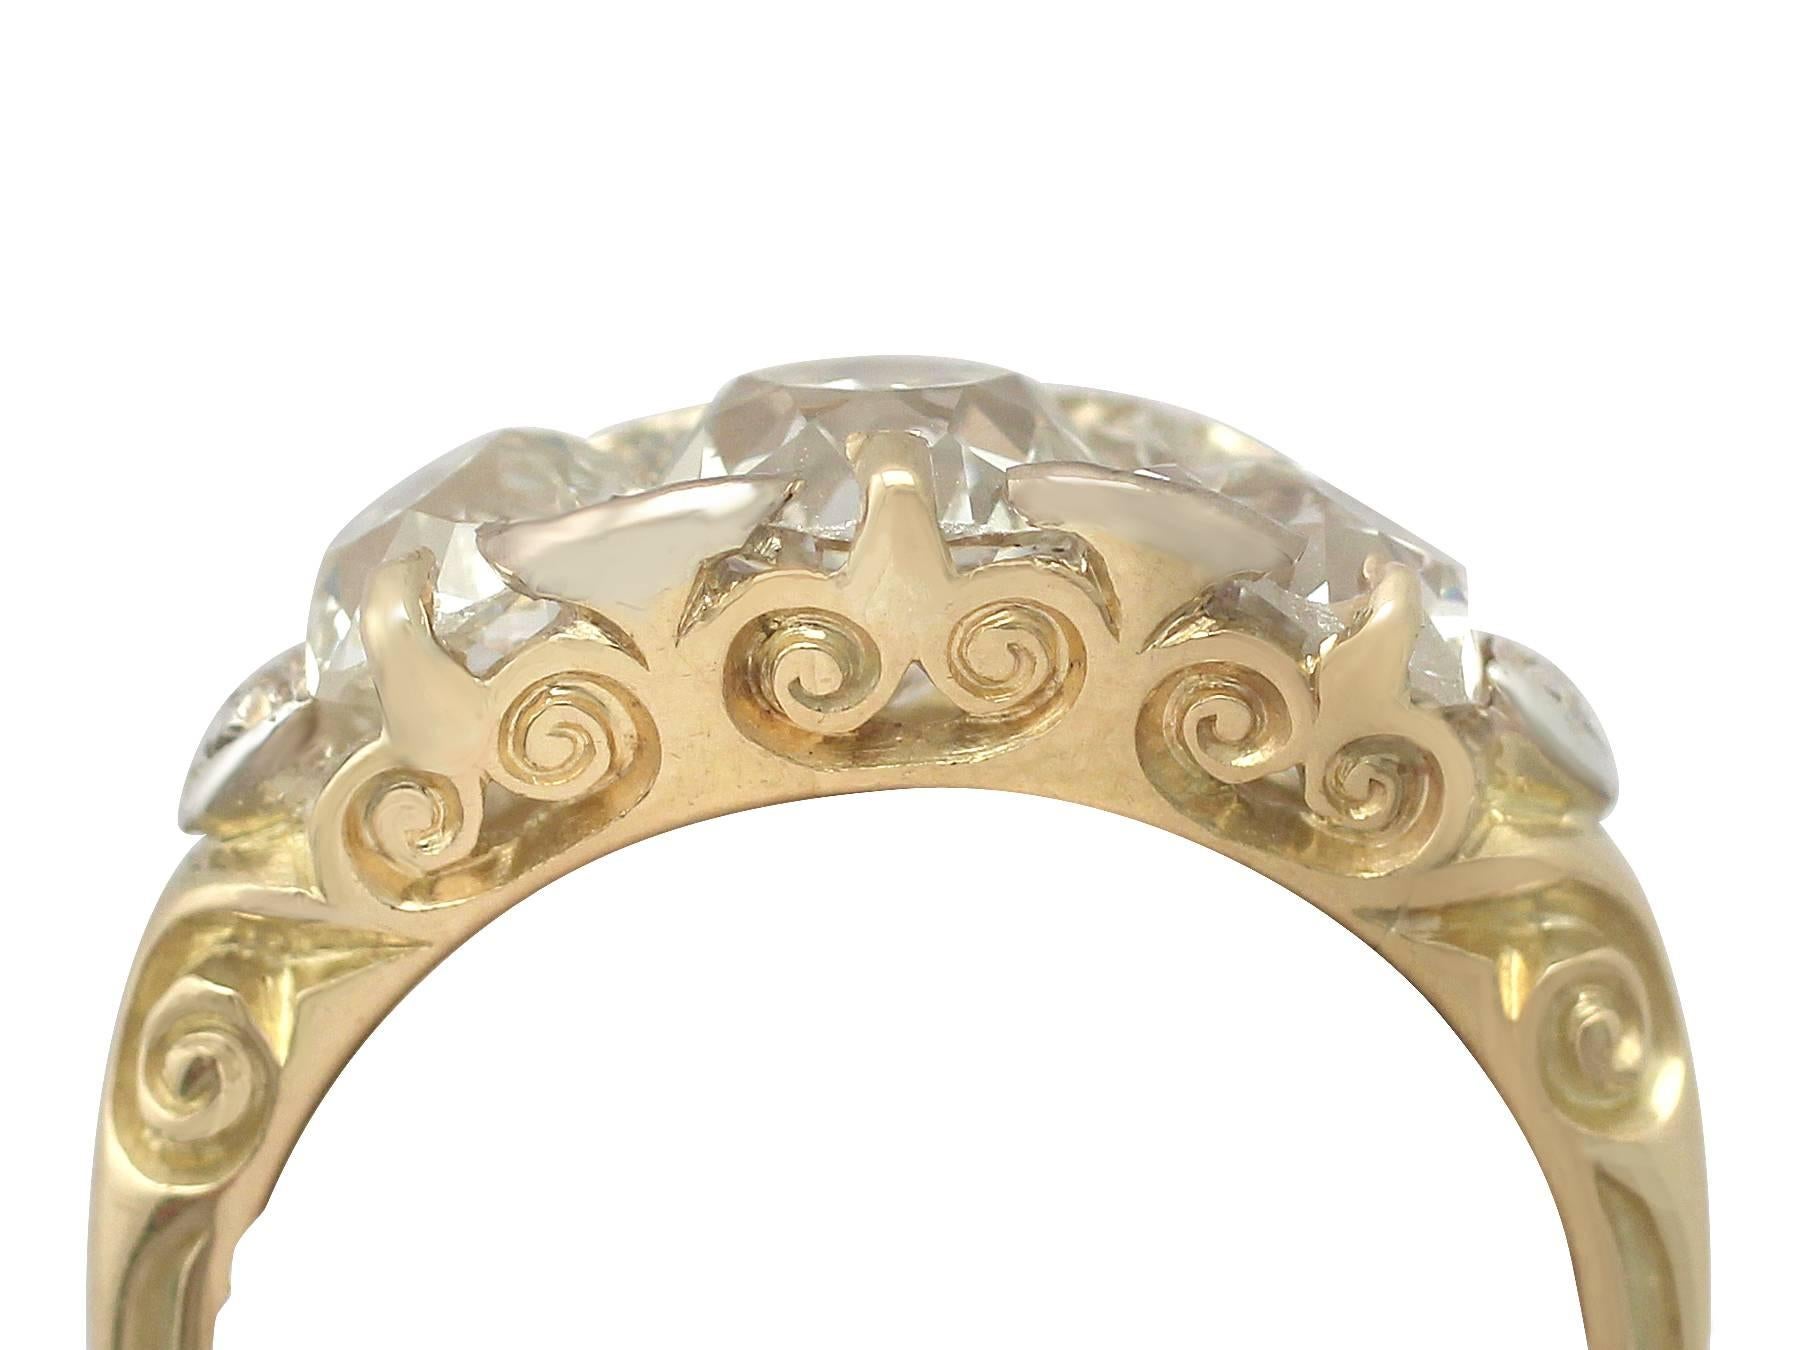 A stunning, fine and impressive 2.62 carat (total) diamond and 18 karat yellow gold, 18 karat white gold set trilogy style dress ring; part of our Victorian jewelry collections

This stunning, fine and impressive Victorian diamond ring has been